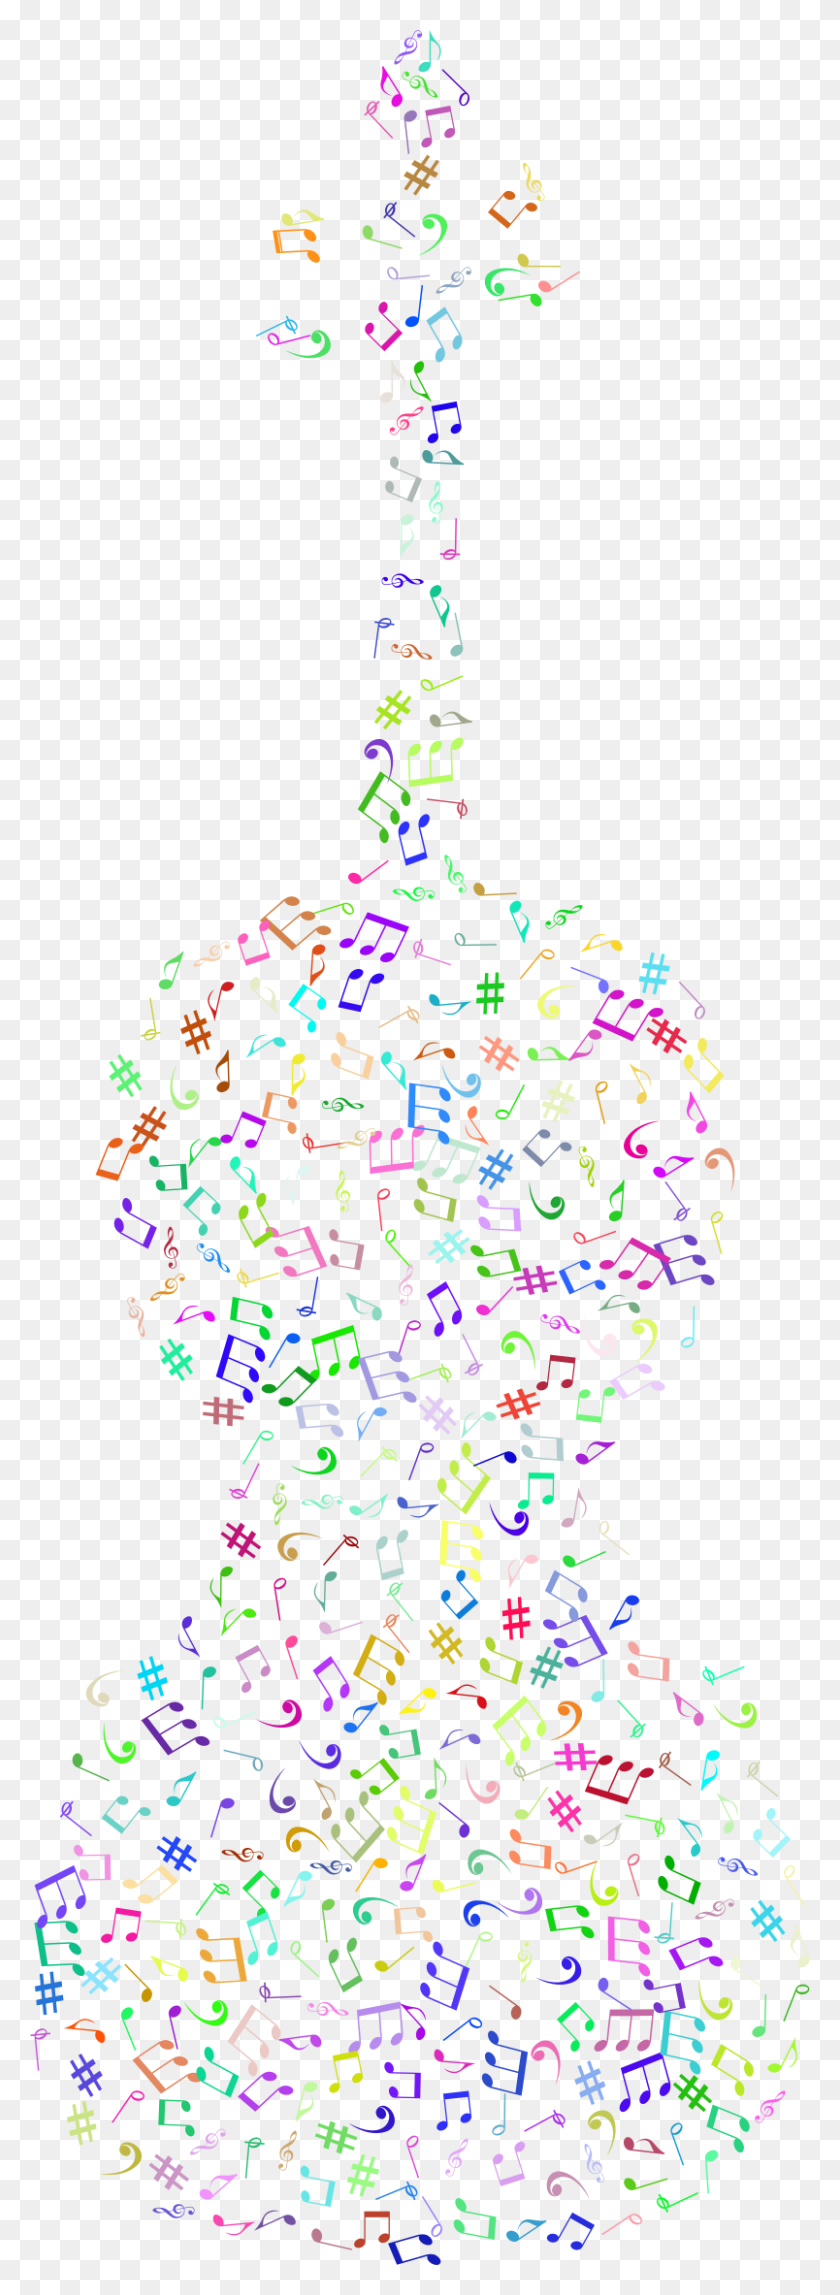 804x2304 This Free Icons Design Of Prismatic Musical Violin Illustration, Christmas Tree, Tree, Ornamento Hd Png Descargar